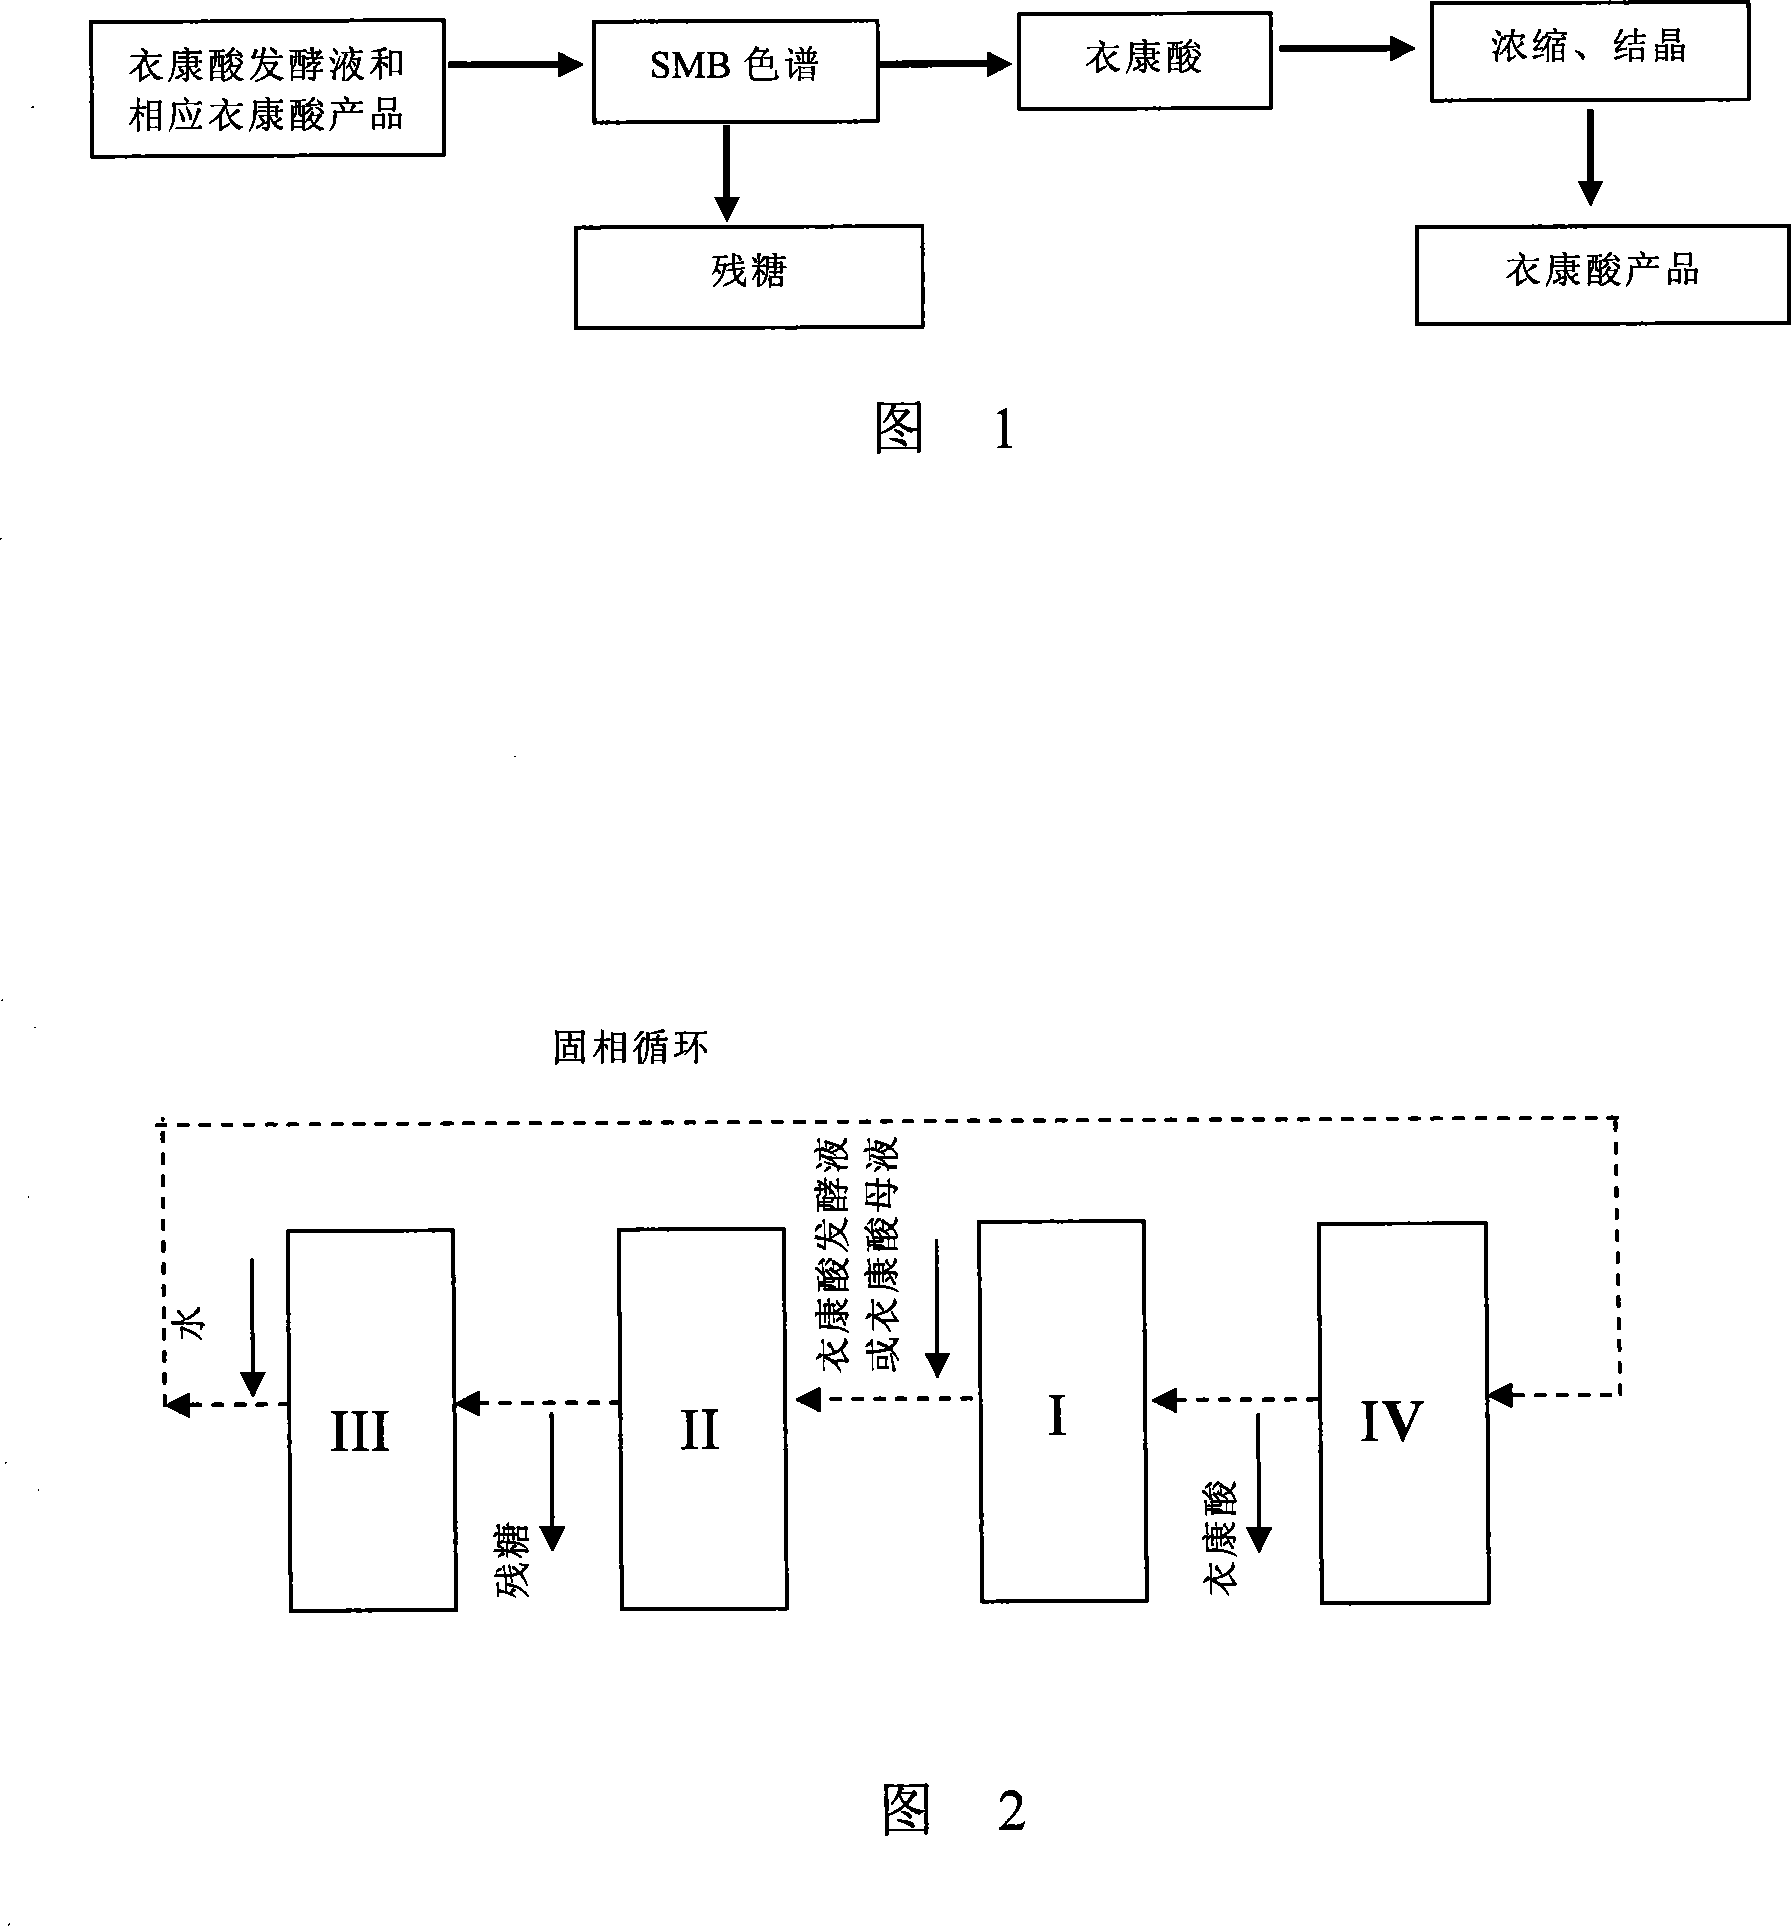 Method for purifying itaconic acid from itaconic acid fermentation liquor or itaconic acid product mother liquid